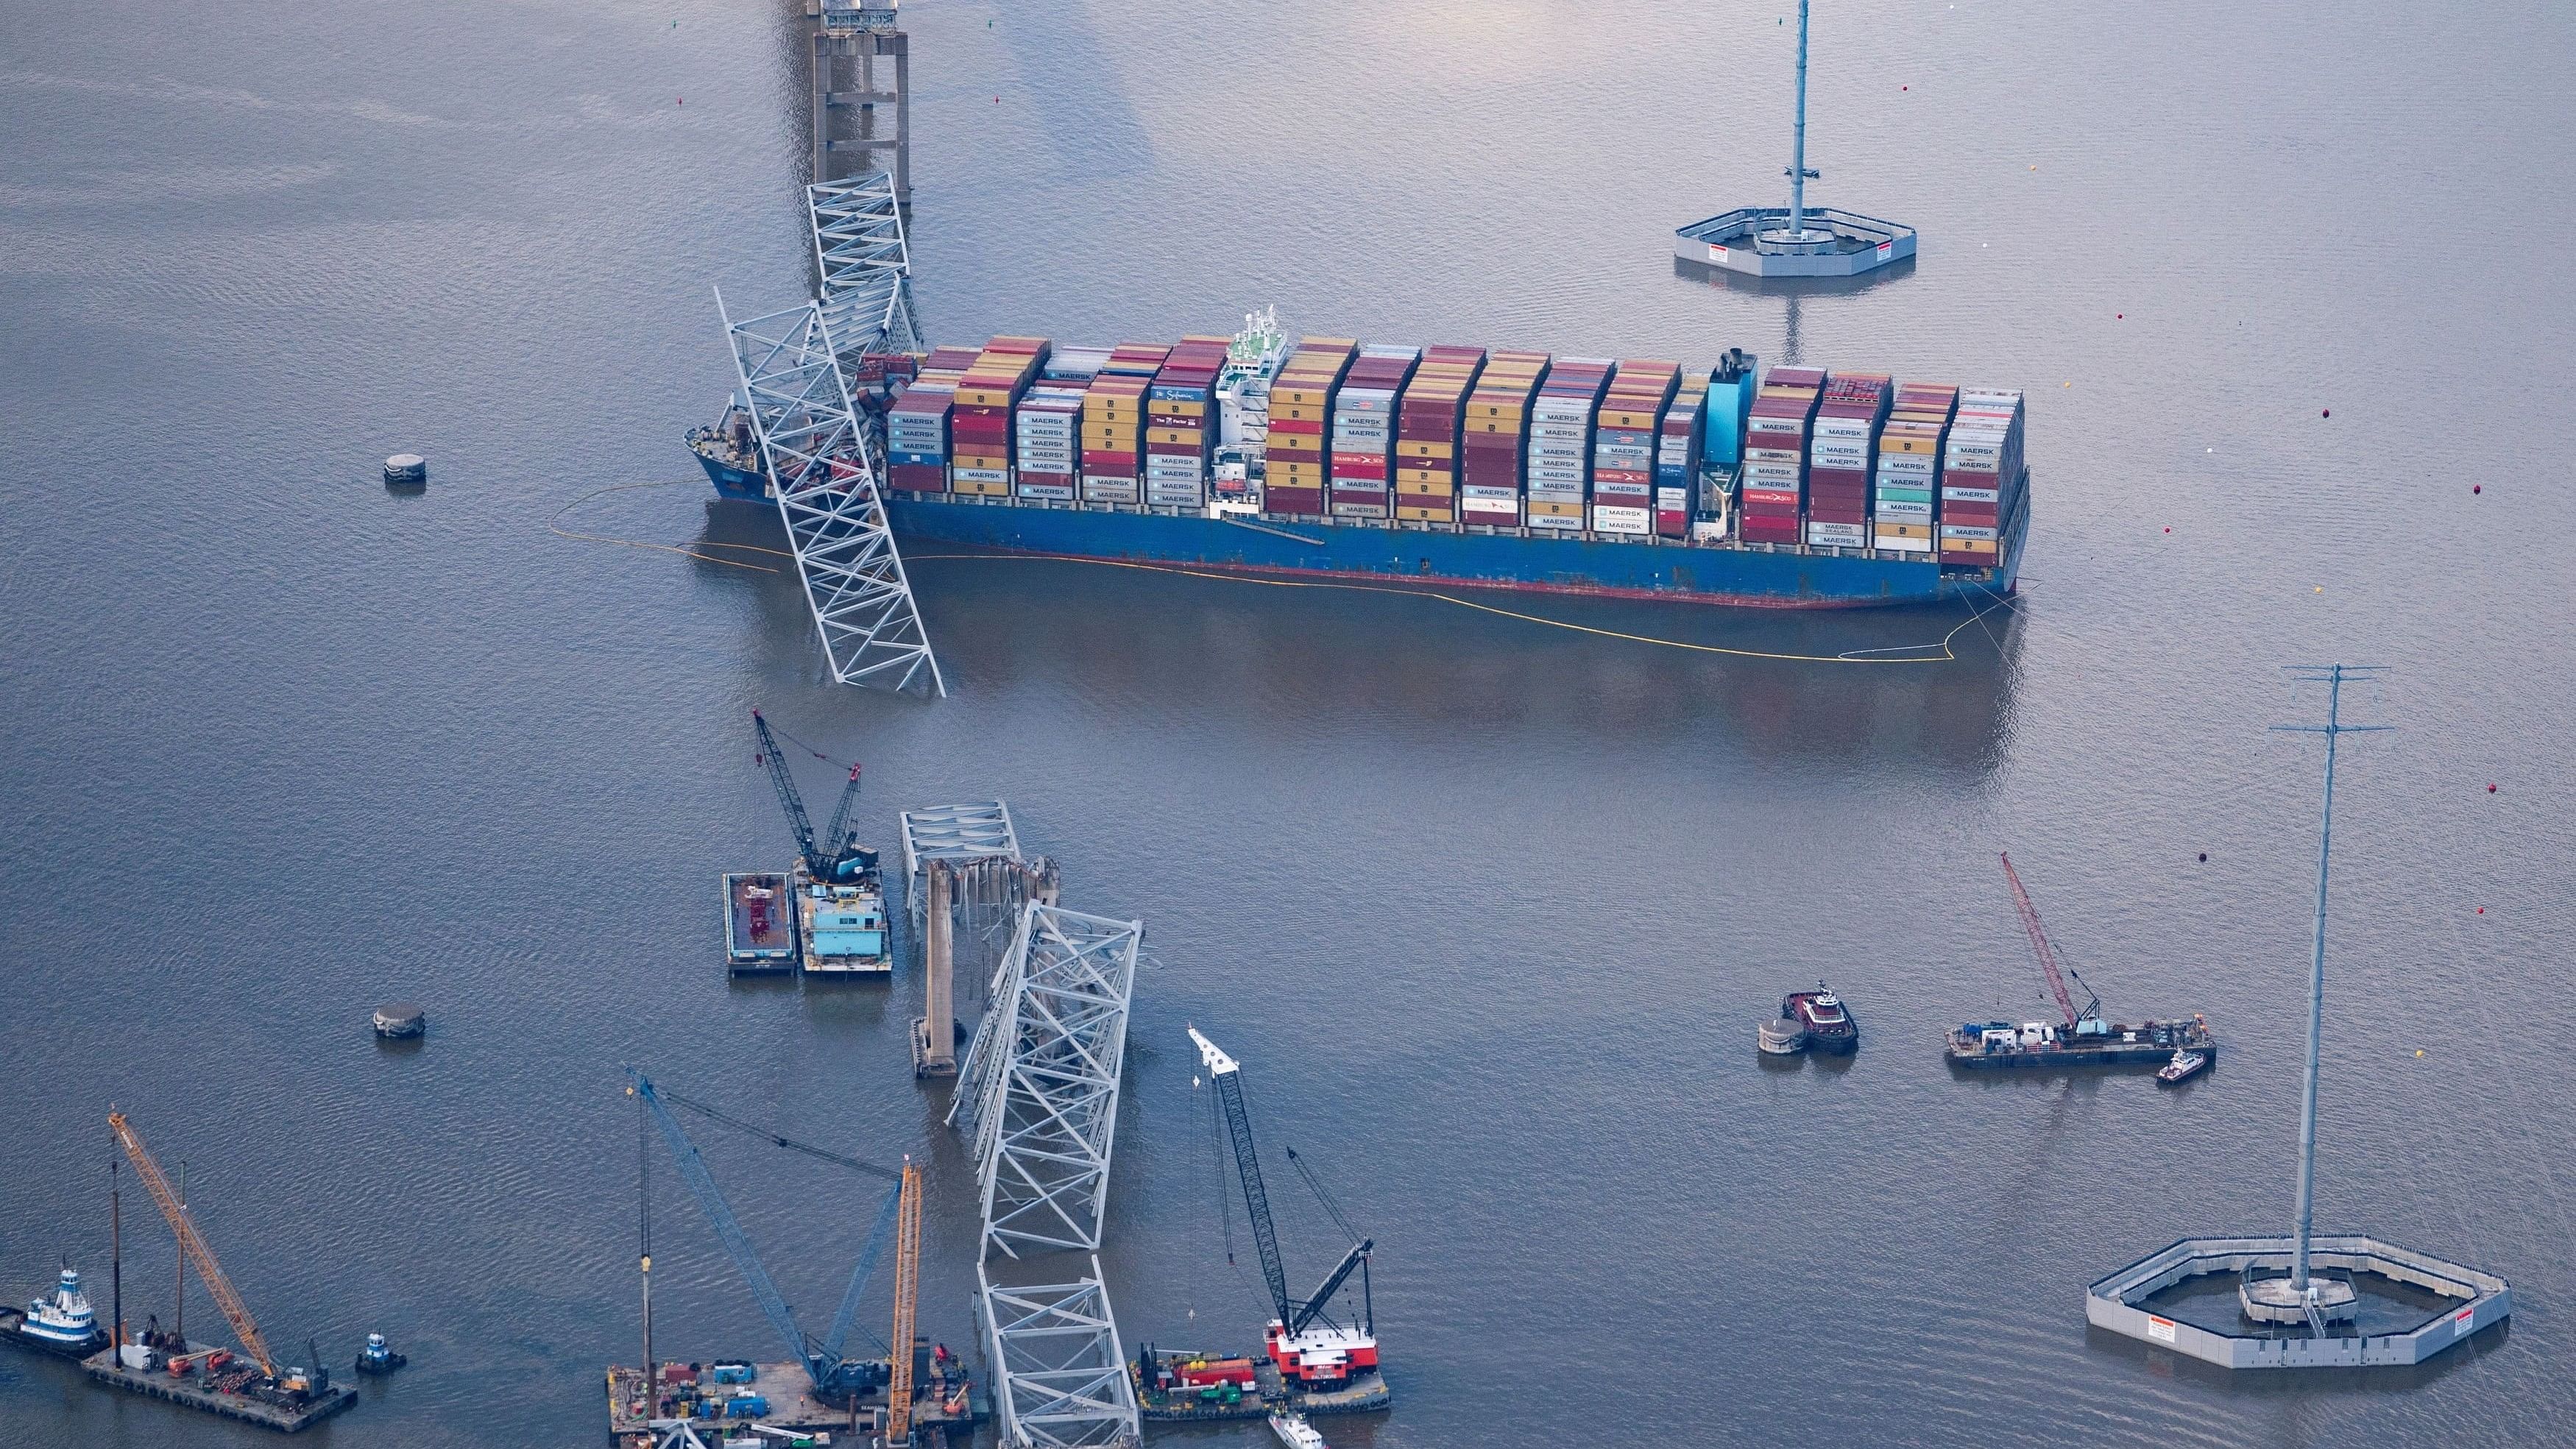 <div class="paragraphs"><p> View of the Dali cargo vessel which crashed into the Francis Scott Key Bridge causing it to collapse in Baltimore, Maryland</p></div>